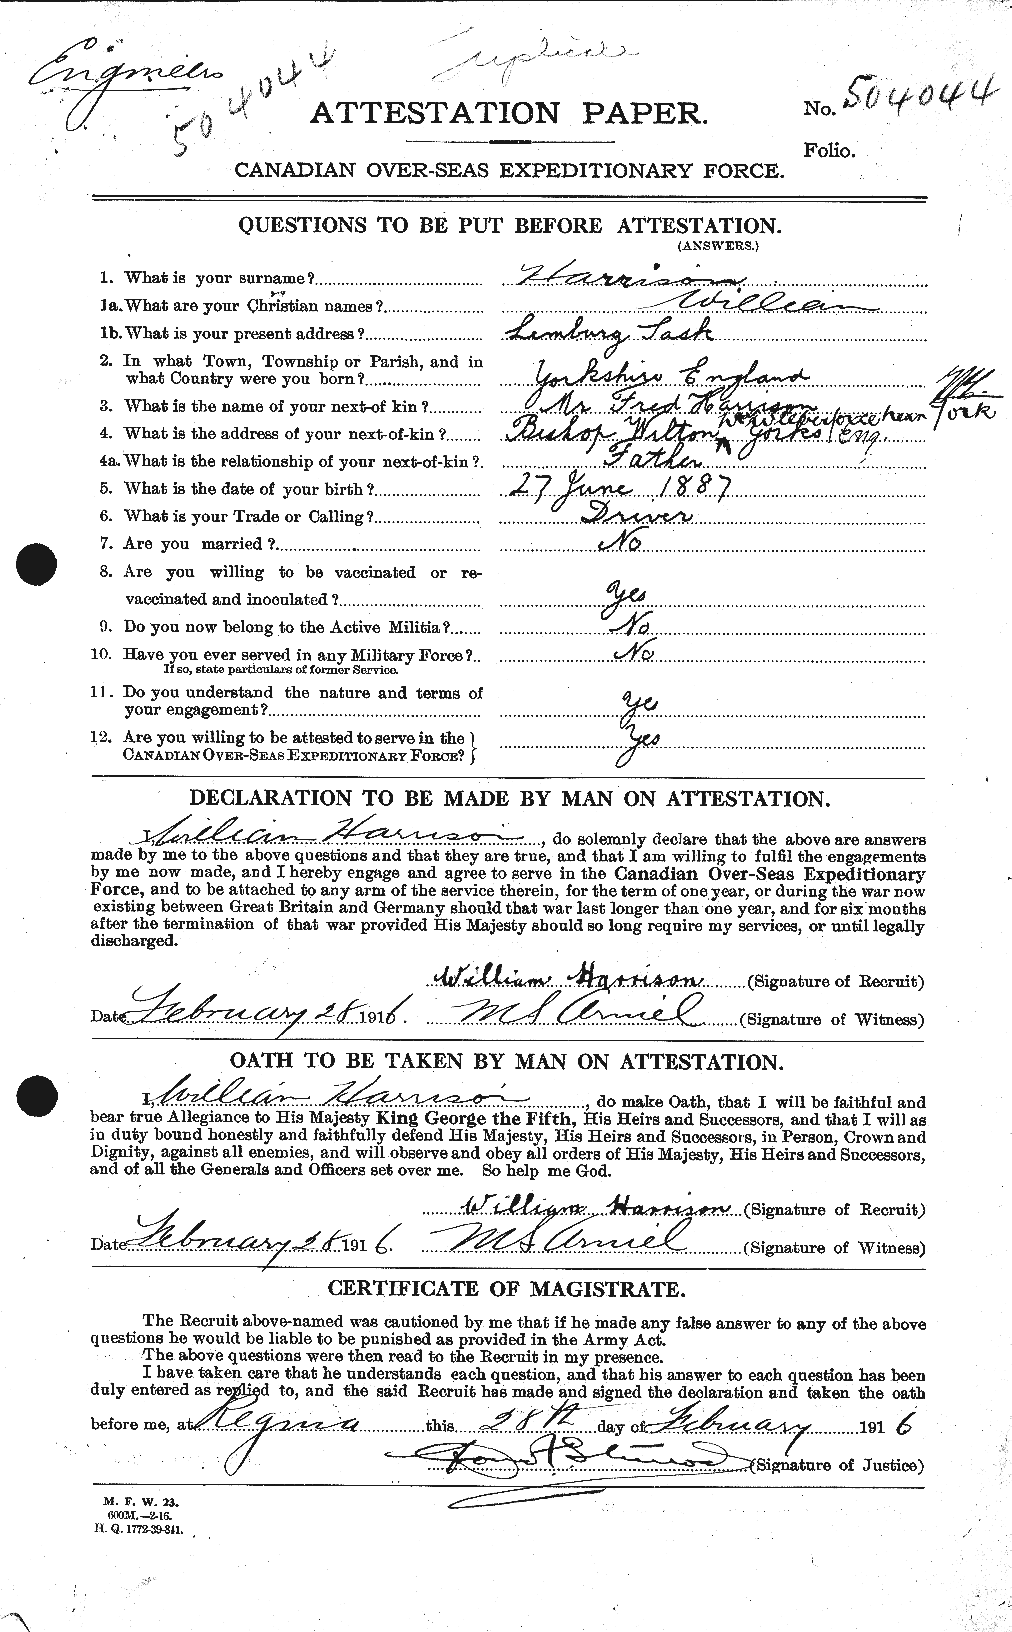 Personnel Records of the First World War - CEF 379955a